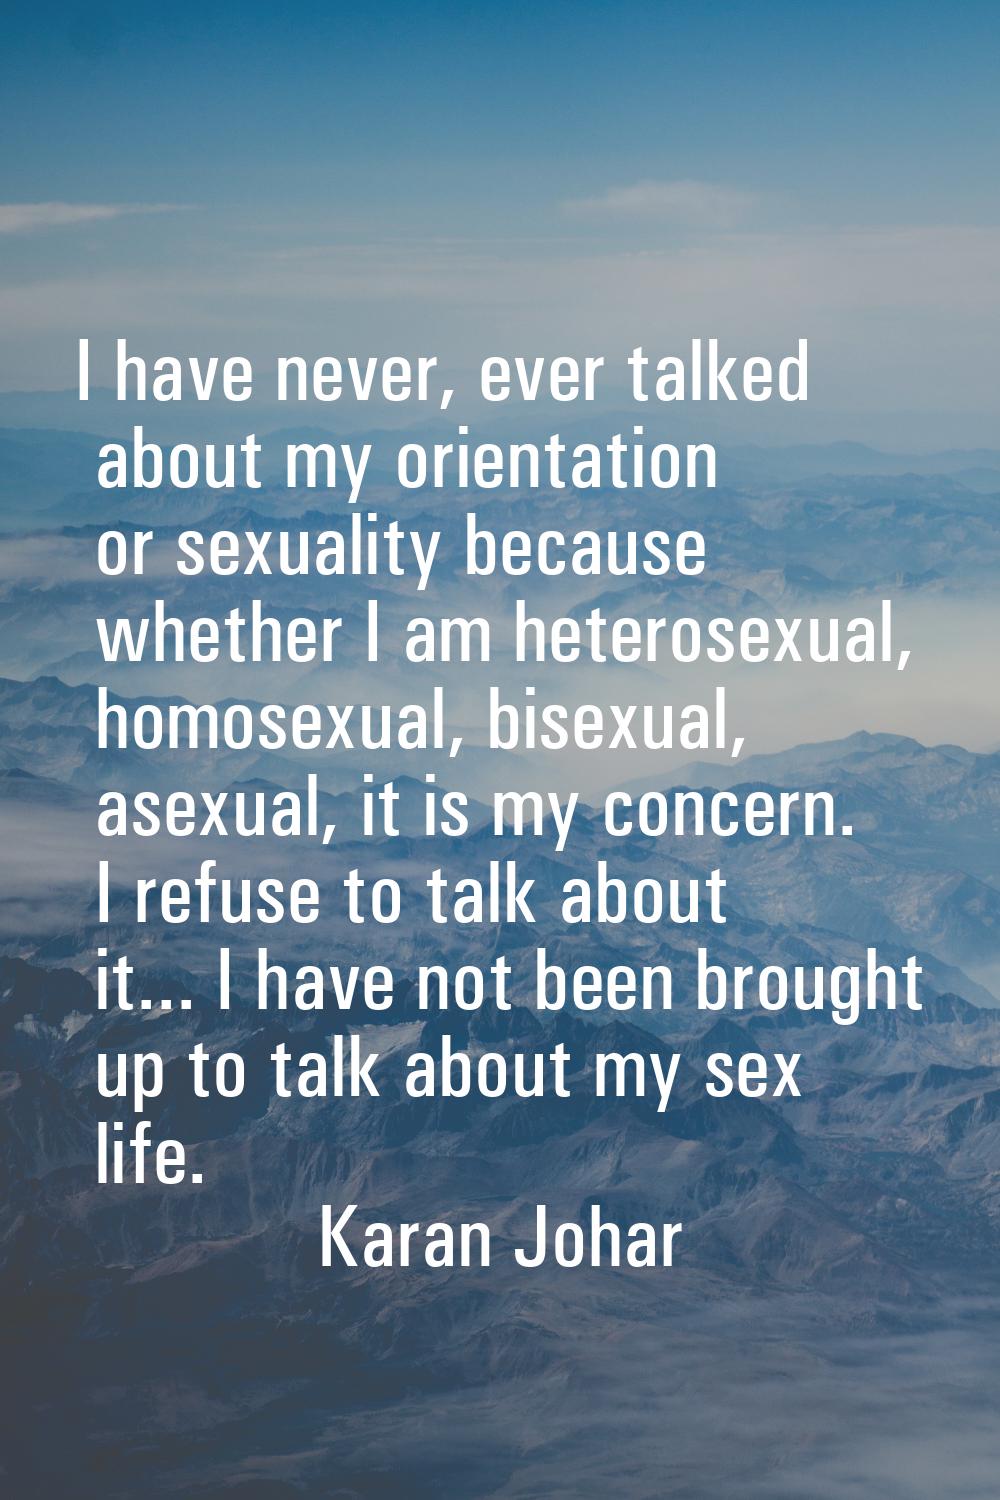 I have never, ever talked about my orientation or sexuality because whether I am heterosexual, homo